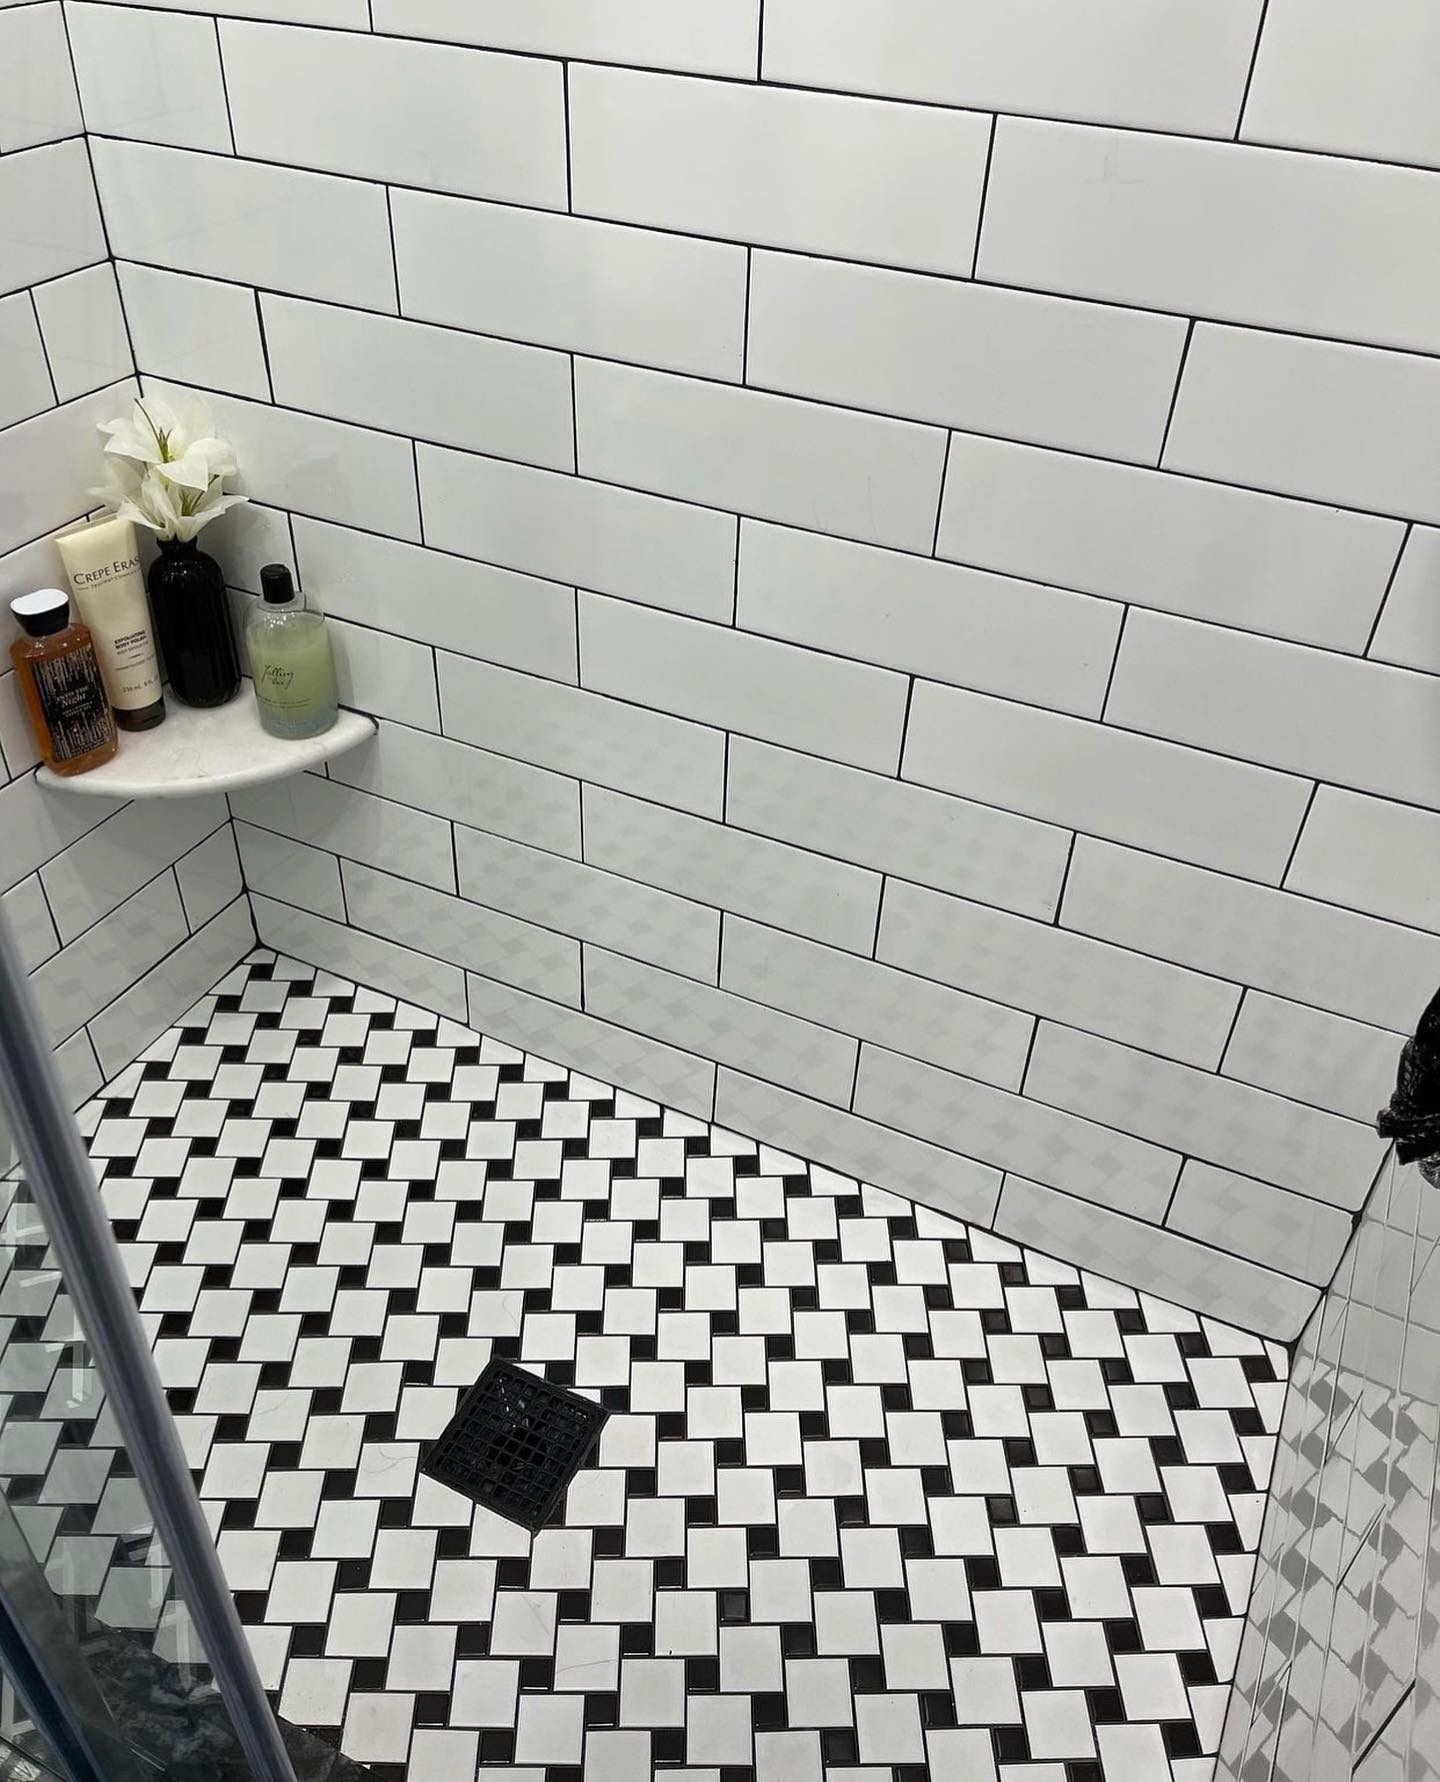 Our Spin series in black & white adds a vintage appeal to the classic pinwheel pattern. This geometric mosaic tile comes in 5 neutral colors! #emsertile via @justbathroomsnj